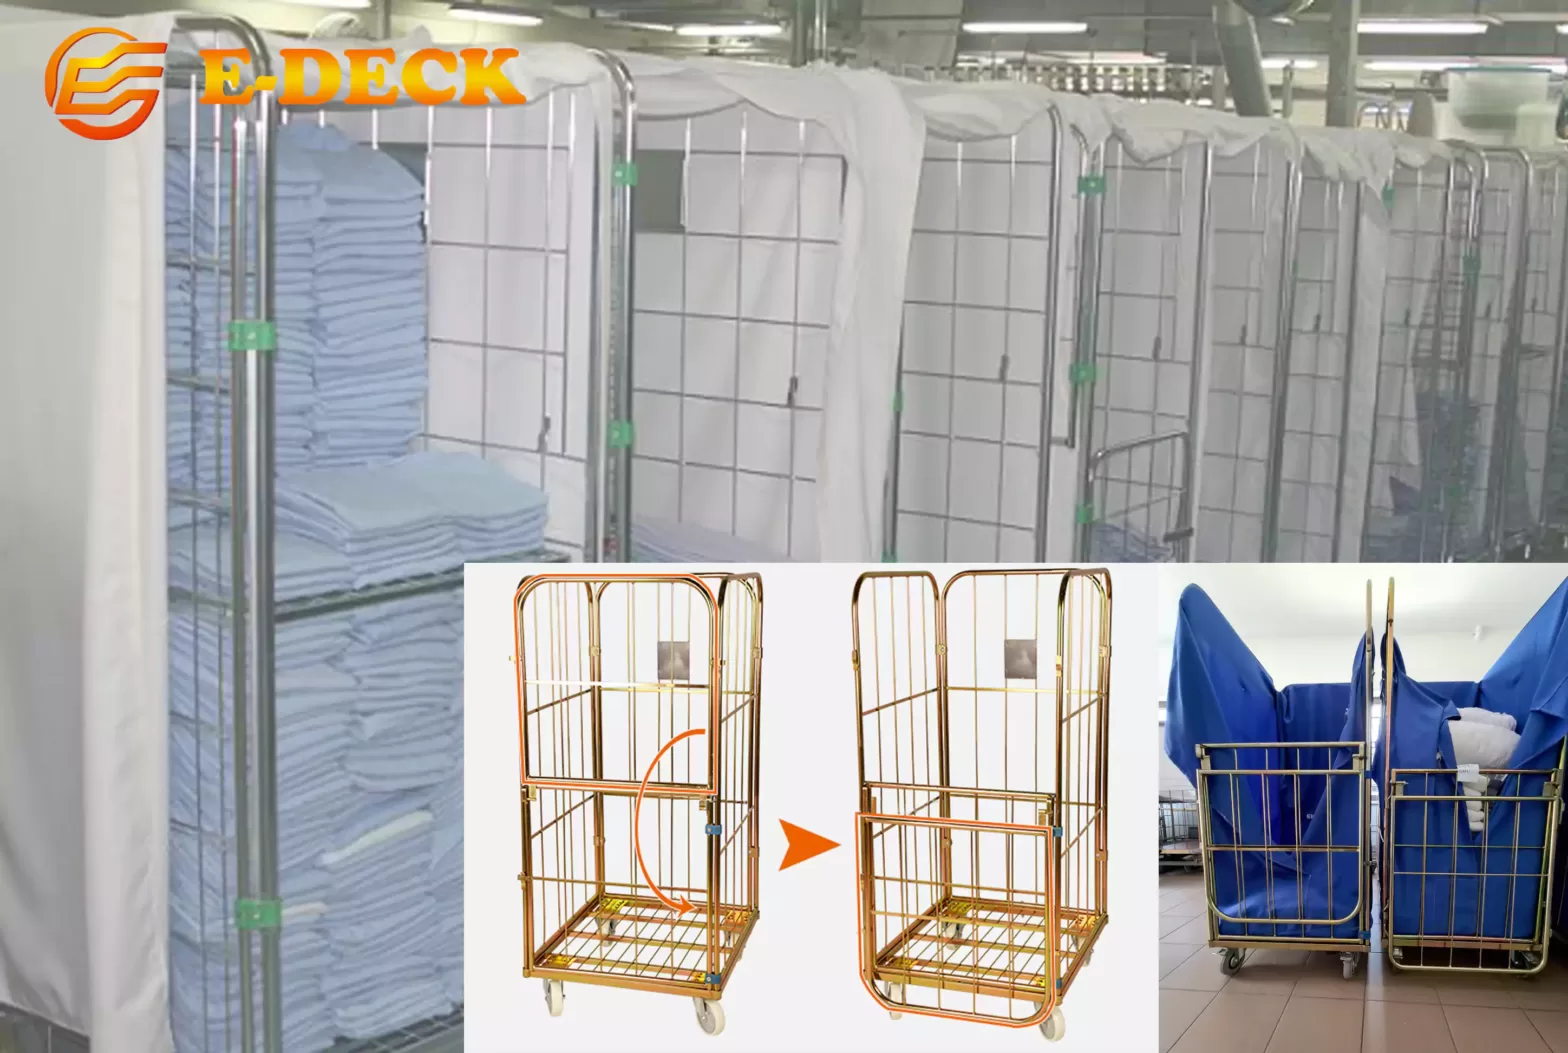 E-Deck Offers Sturdy, Durable Laundry Cage